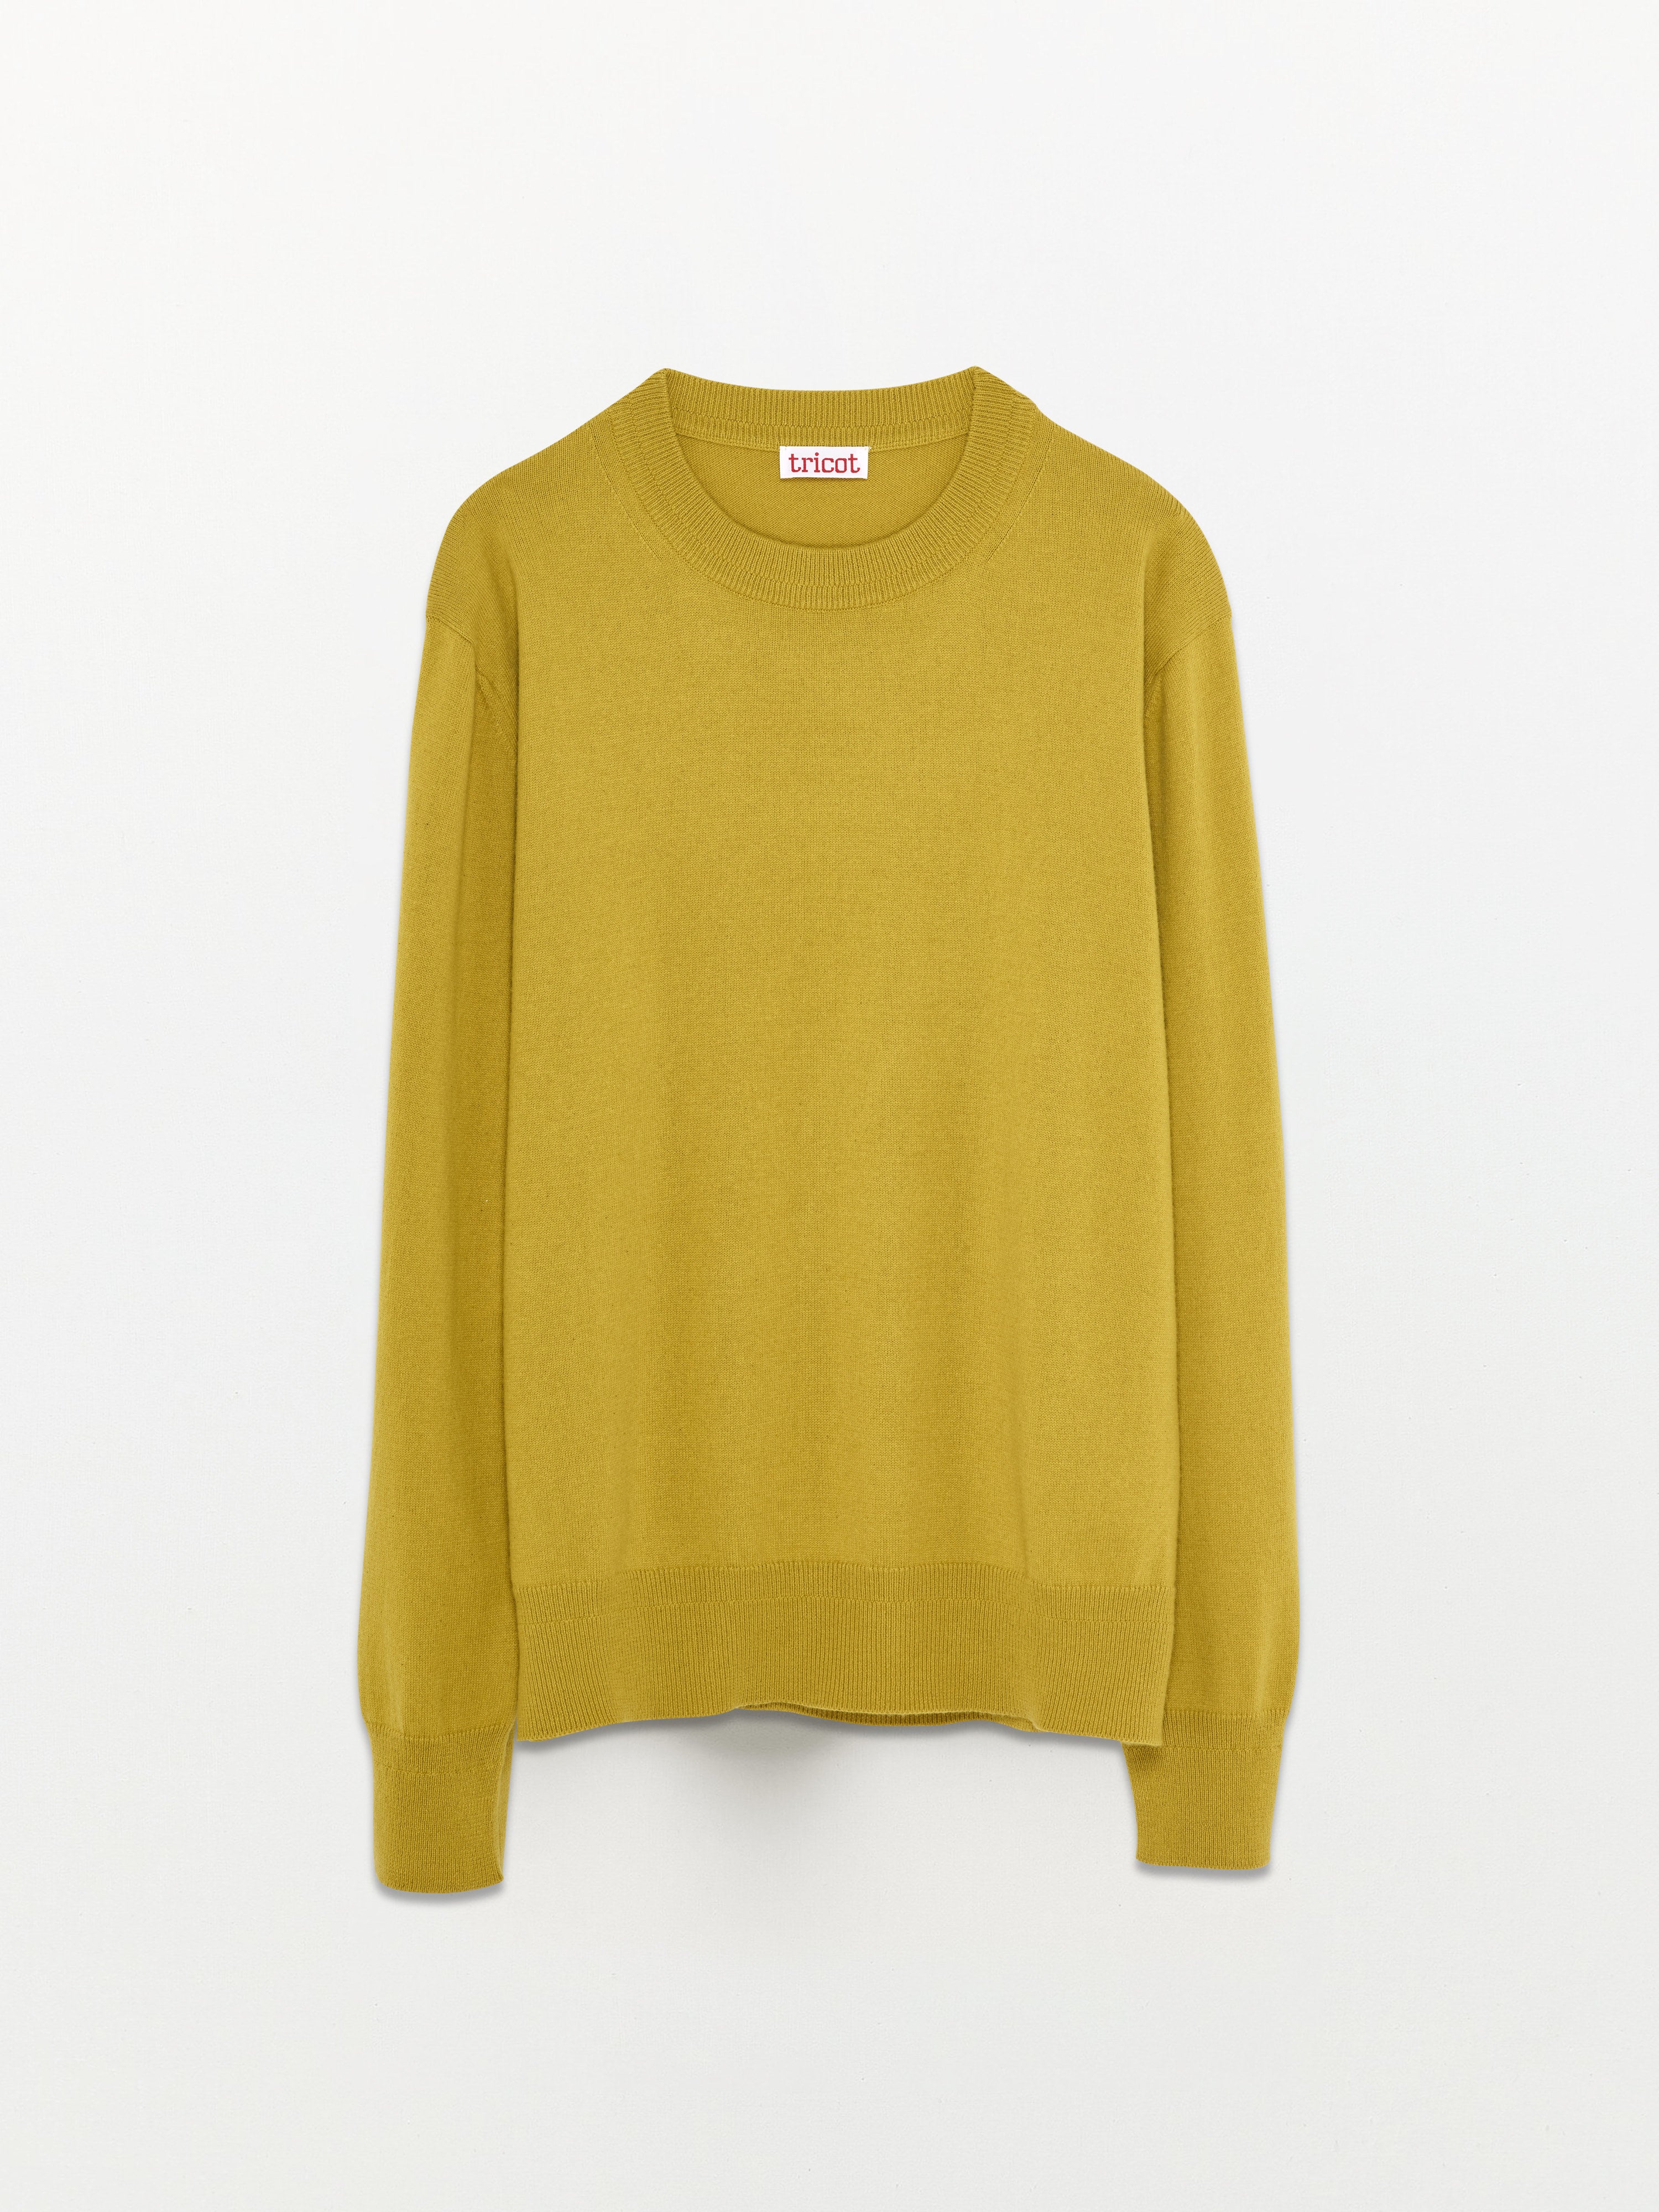 Women’s Yellow Recycled Cashmere & Cotton Sweater